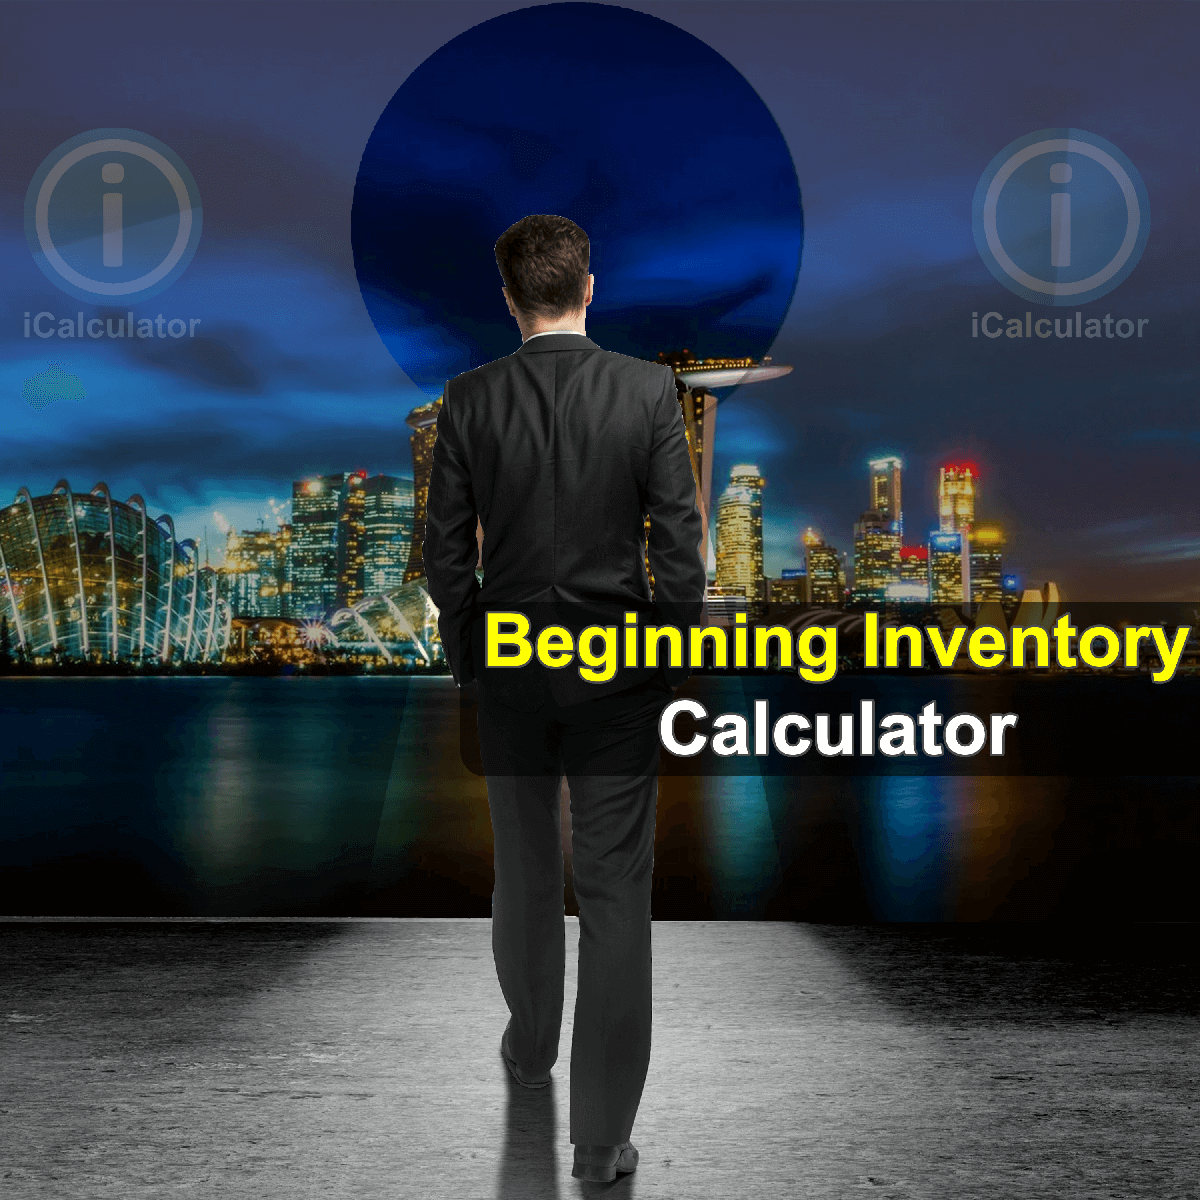 Beginning Inventory Calculator. This image provides details of how to calculate beginning inventory using a calculator and notepad. By using the Beginning Inventory formula, the Beginning Inventory Calculator provides a true calculation of the cash value of a company's inventory at the beginning of a new accounting period